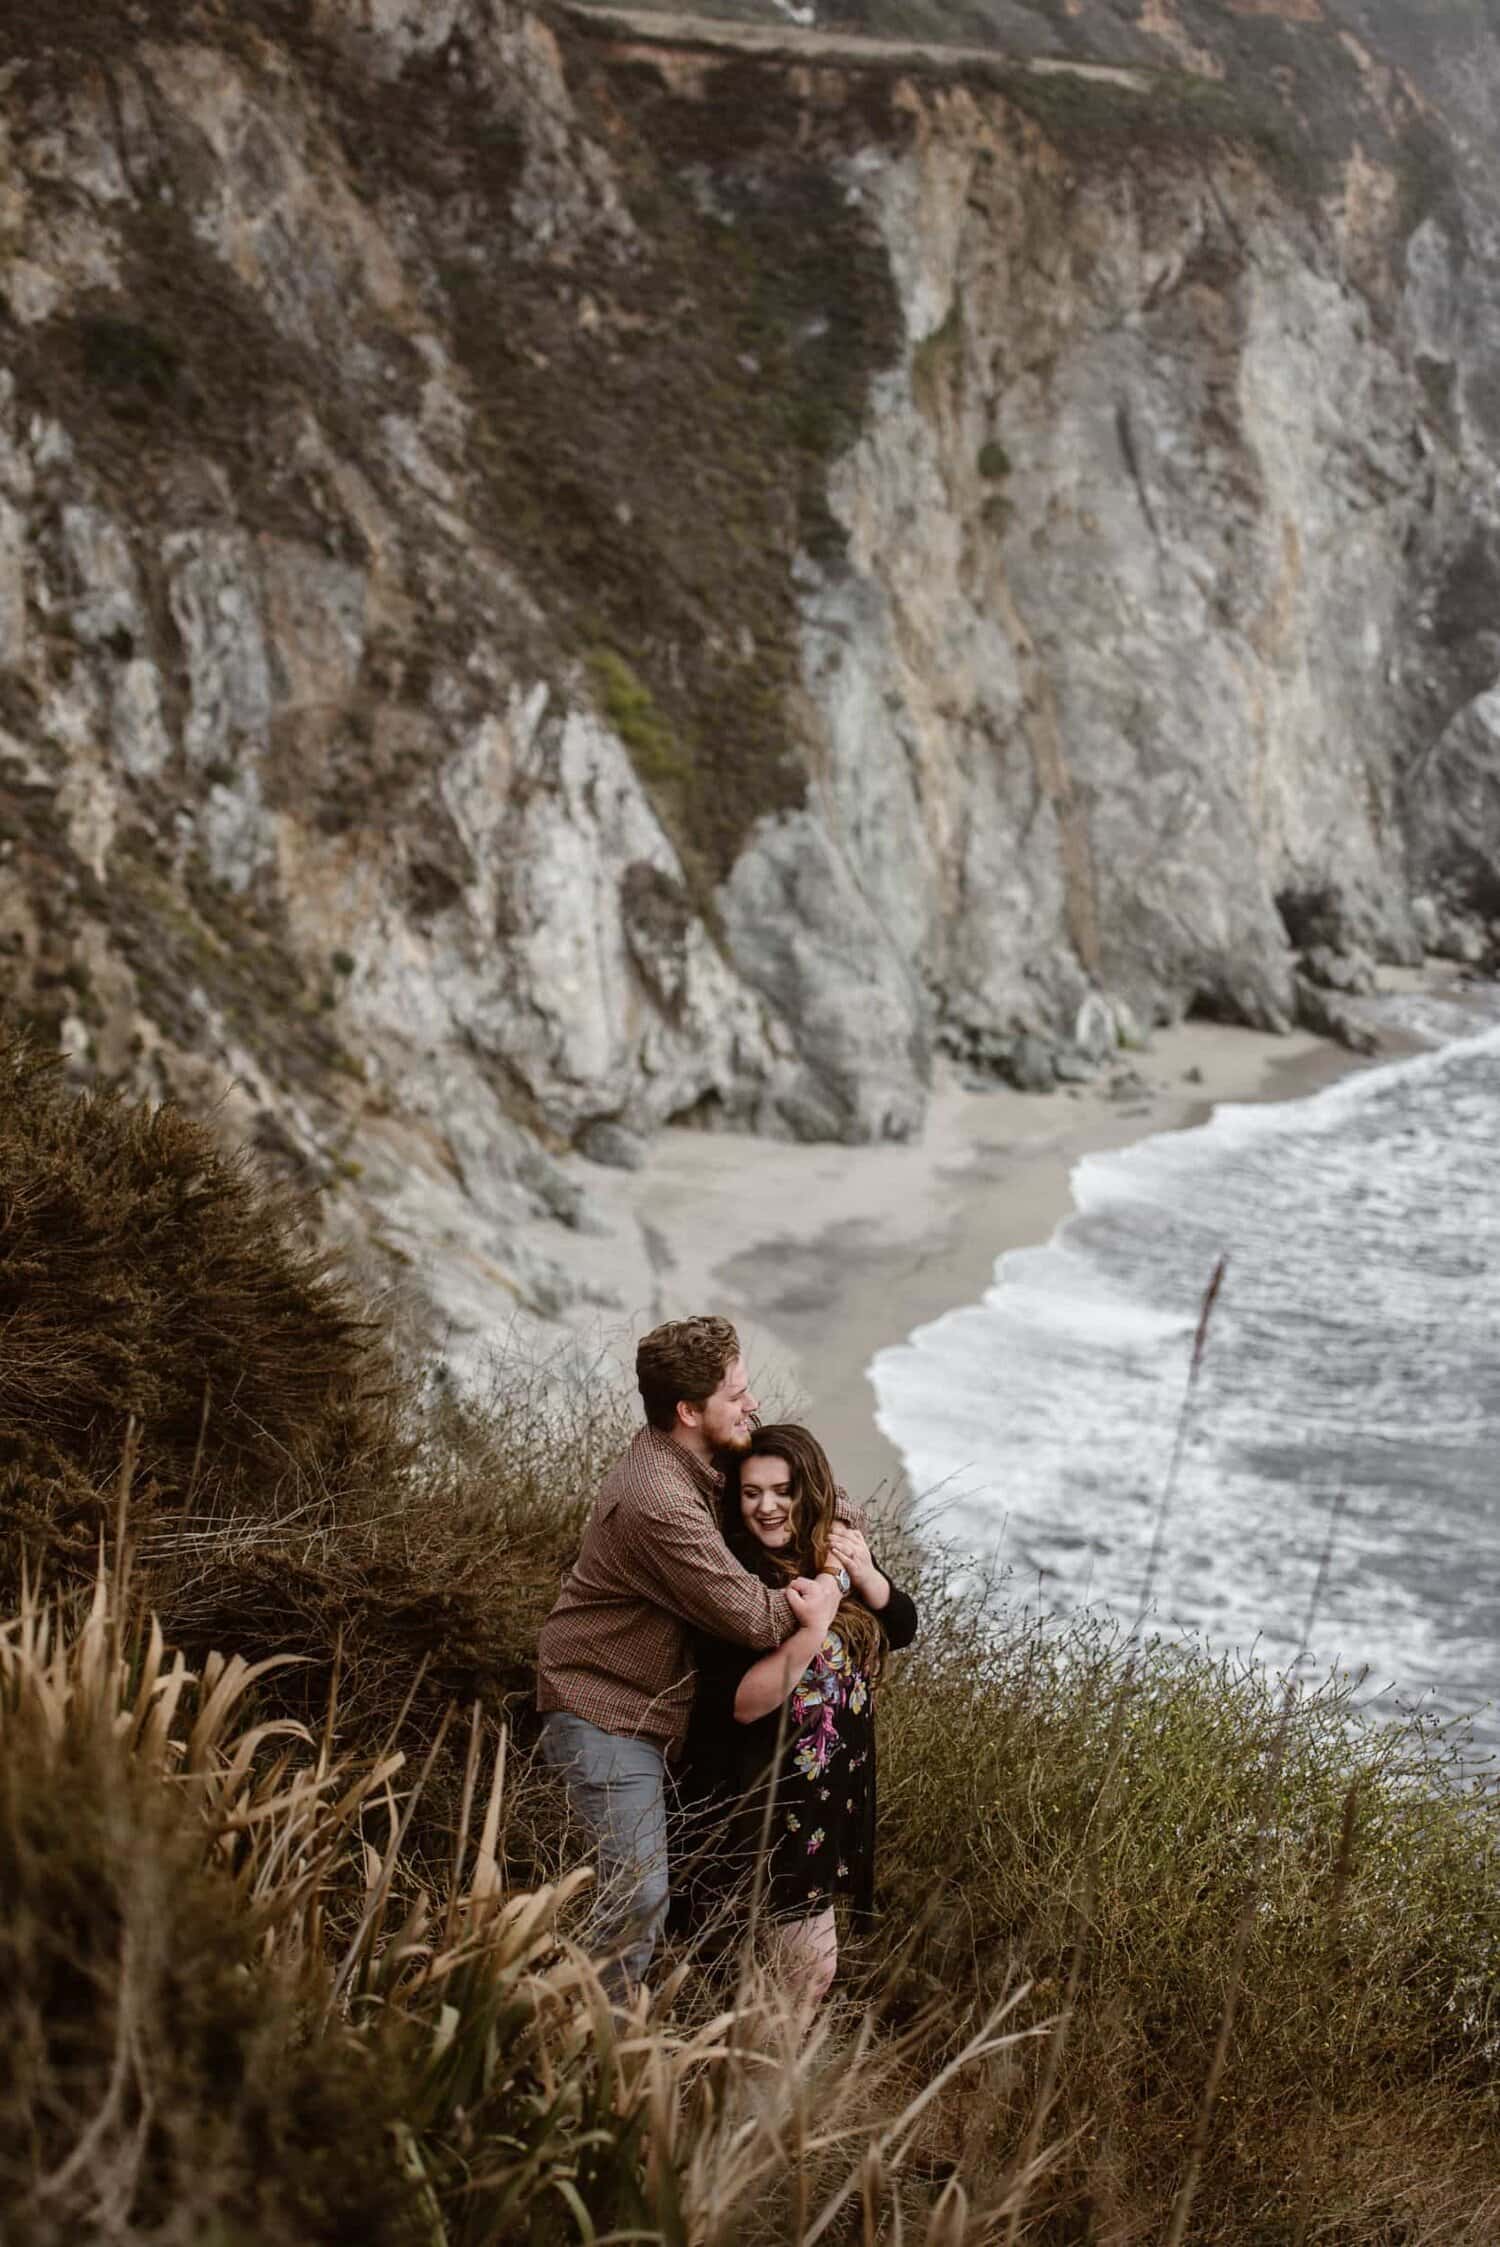 Bride and groom embrace surrounded by tall grass, with the ocean in the background in Big Sur, California.